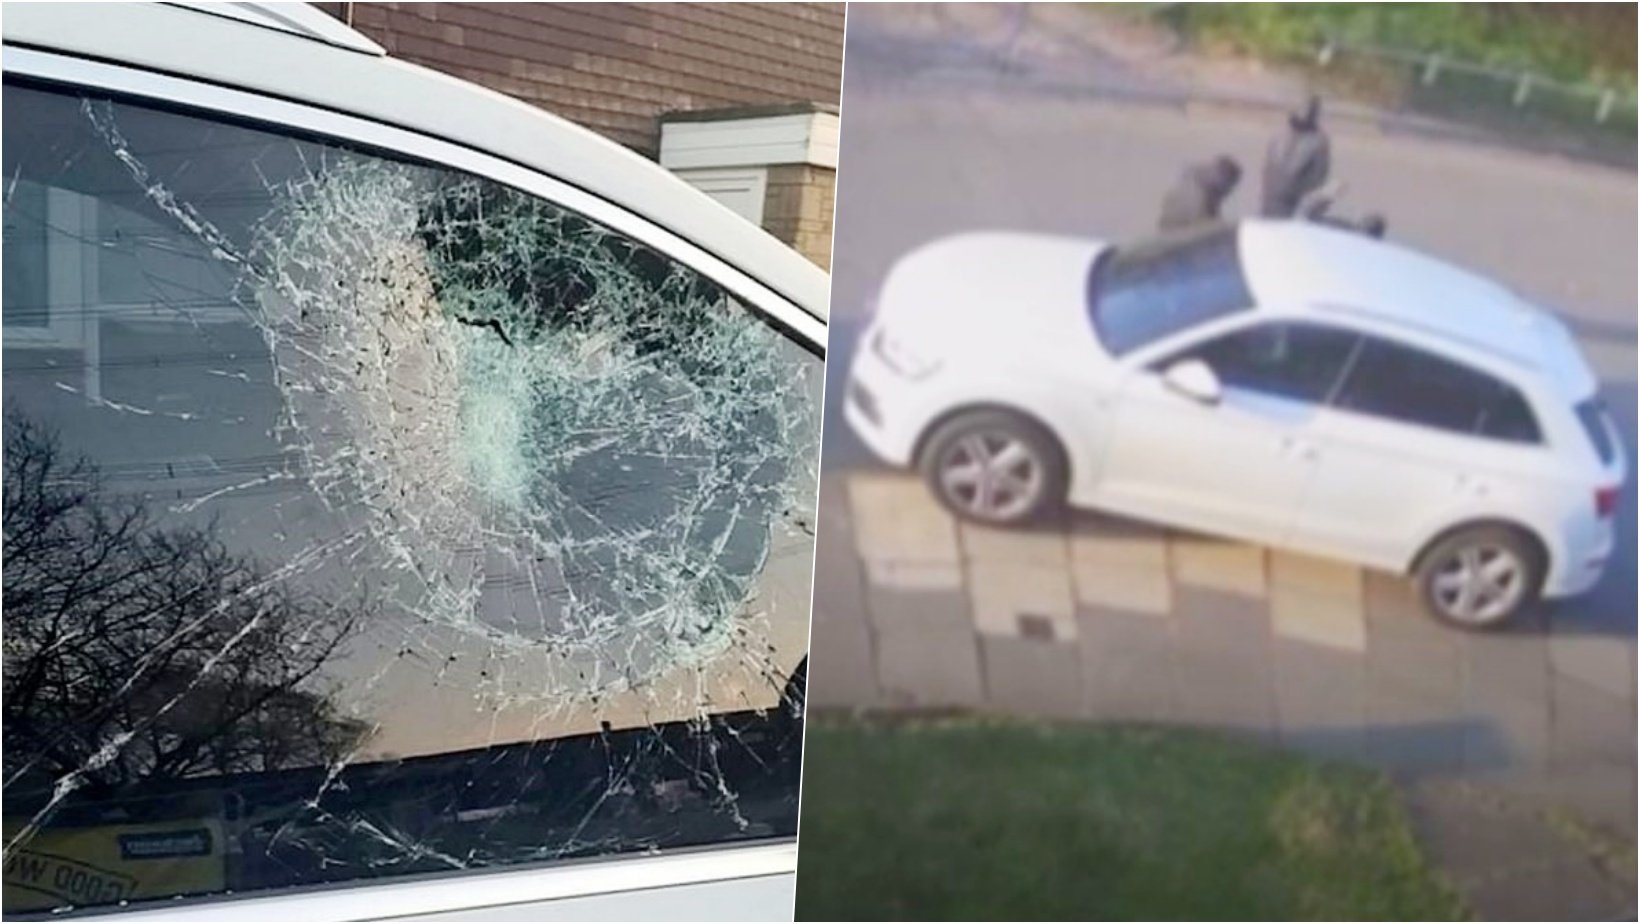 6 facebook cover 5.jpg?resize=1200,630 - 7-Year-Old Boy Screams “Drive Mom, Drive” After Carjack Masked Thugs With Machete Smashed Car’s Window